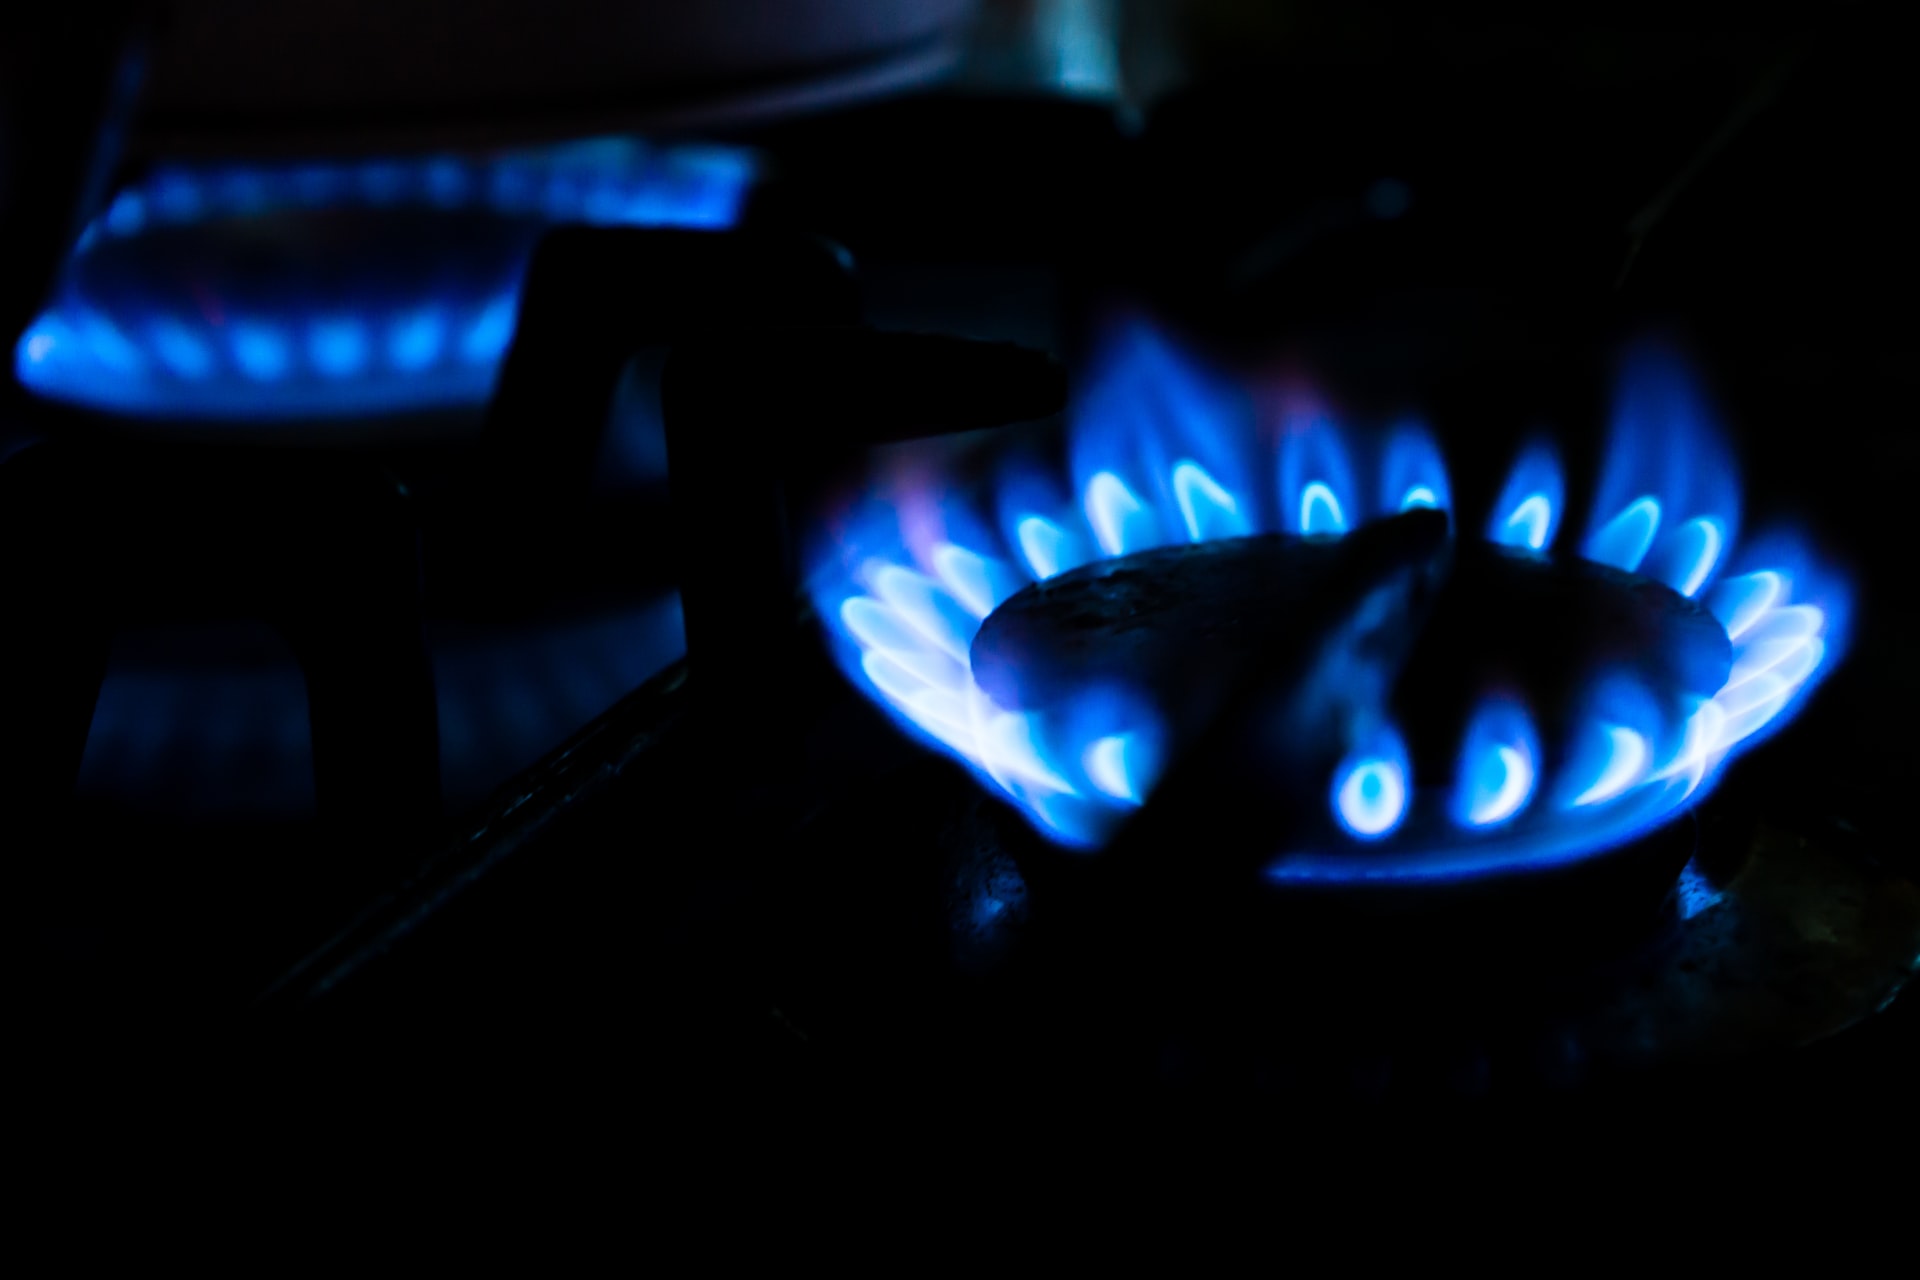 April Cruel Day: Does the Ofgem price cap really protect us from ‘unfair’ prices?